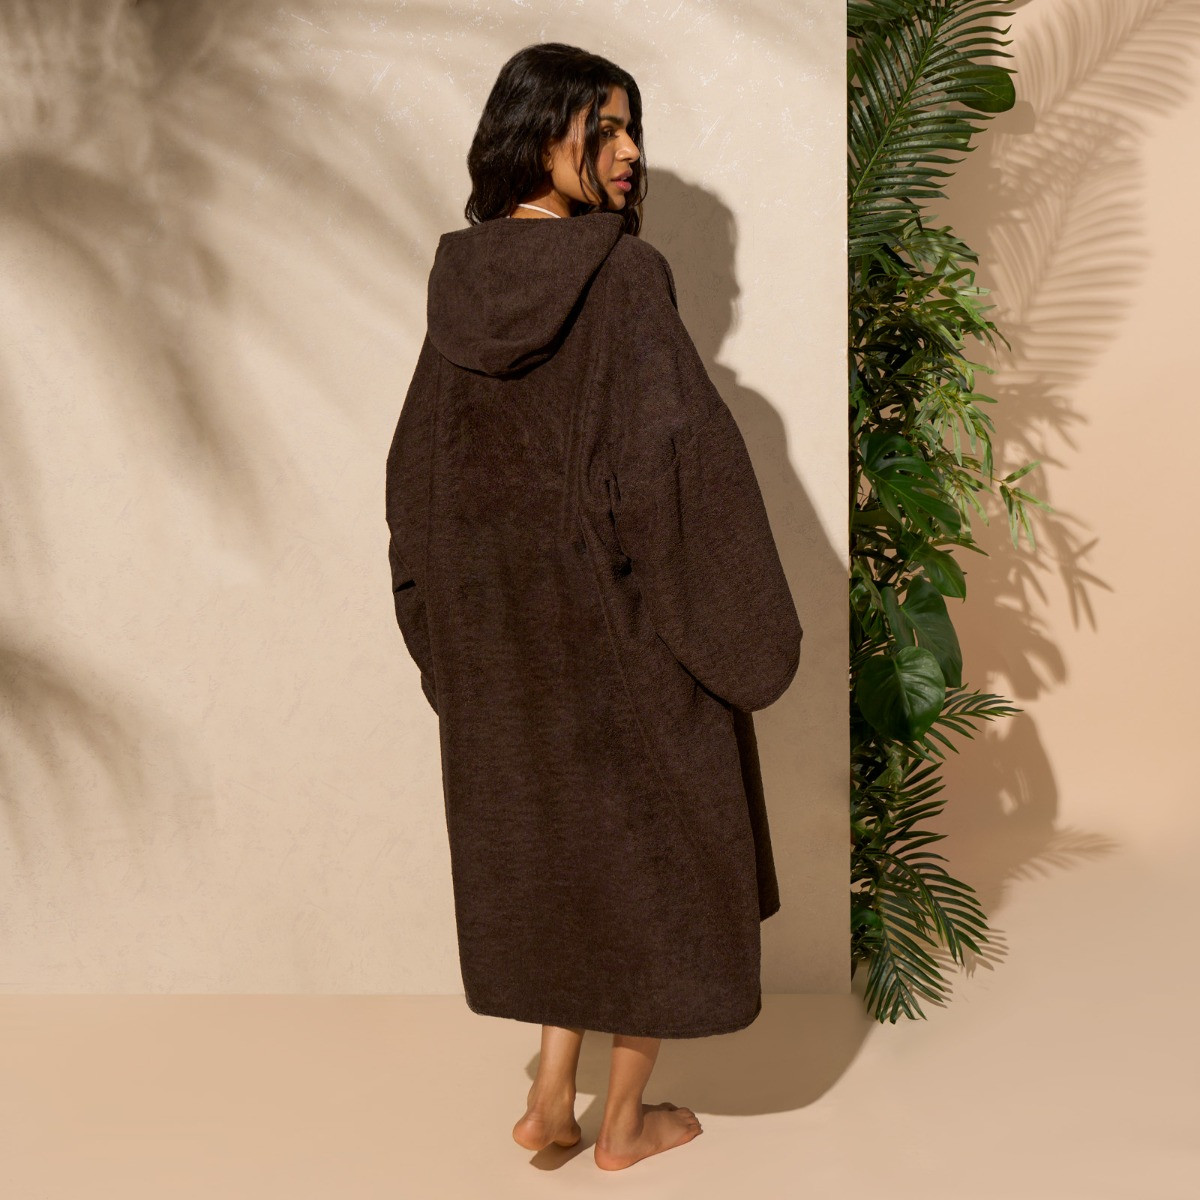 OHS Adult Towel Poncho - Chocolate>